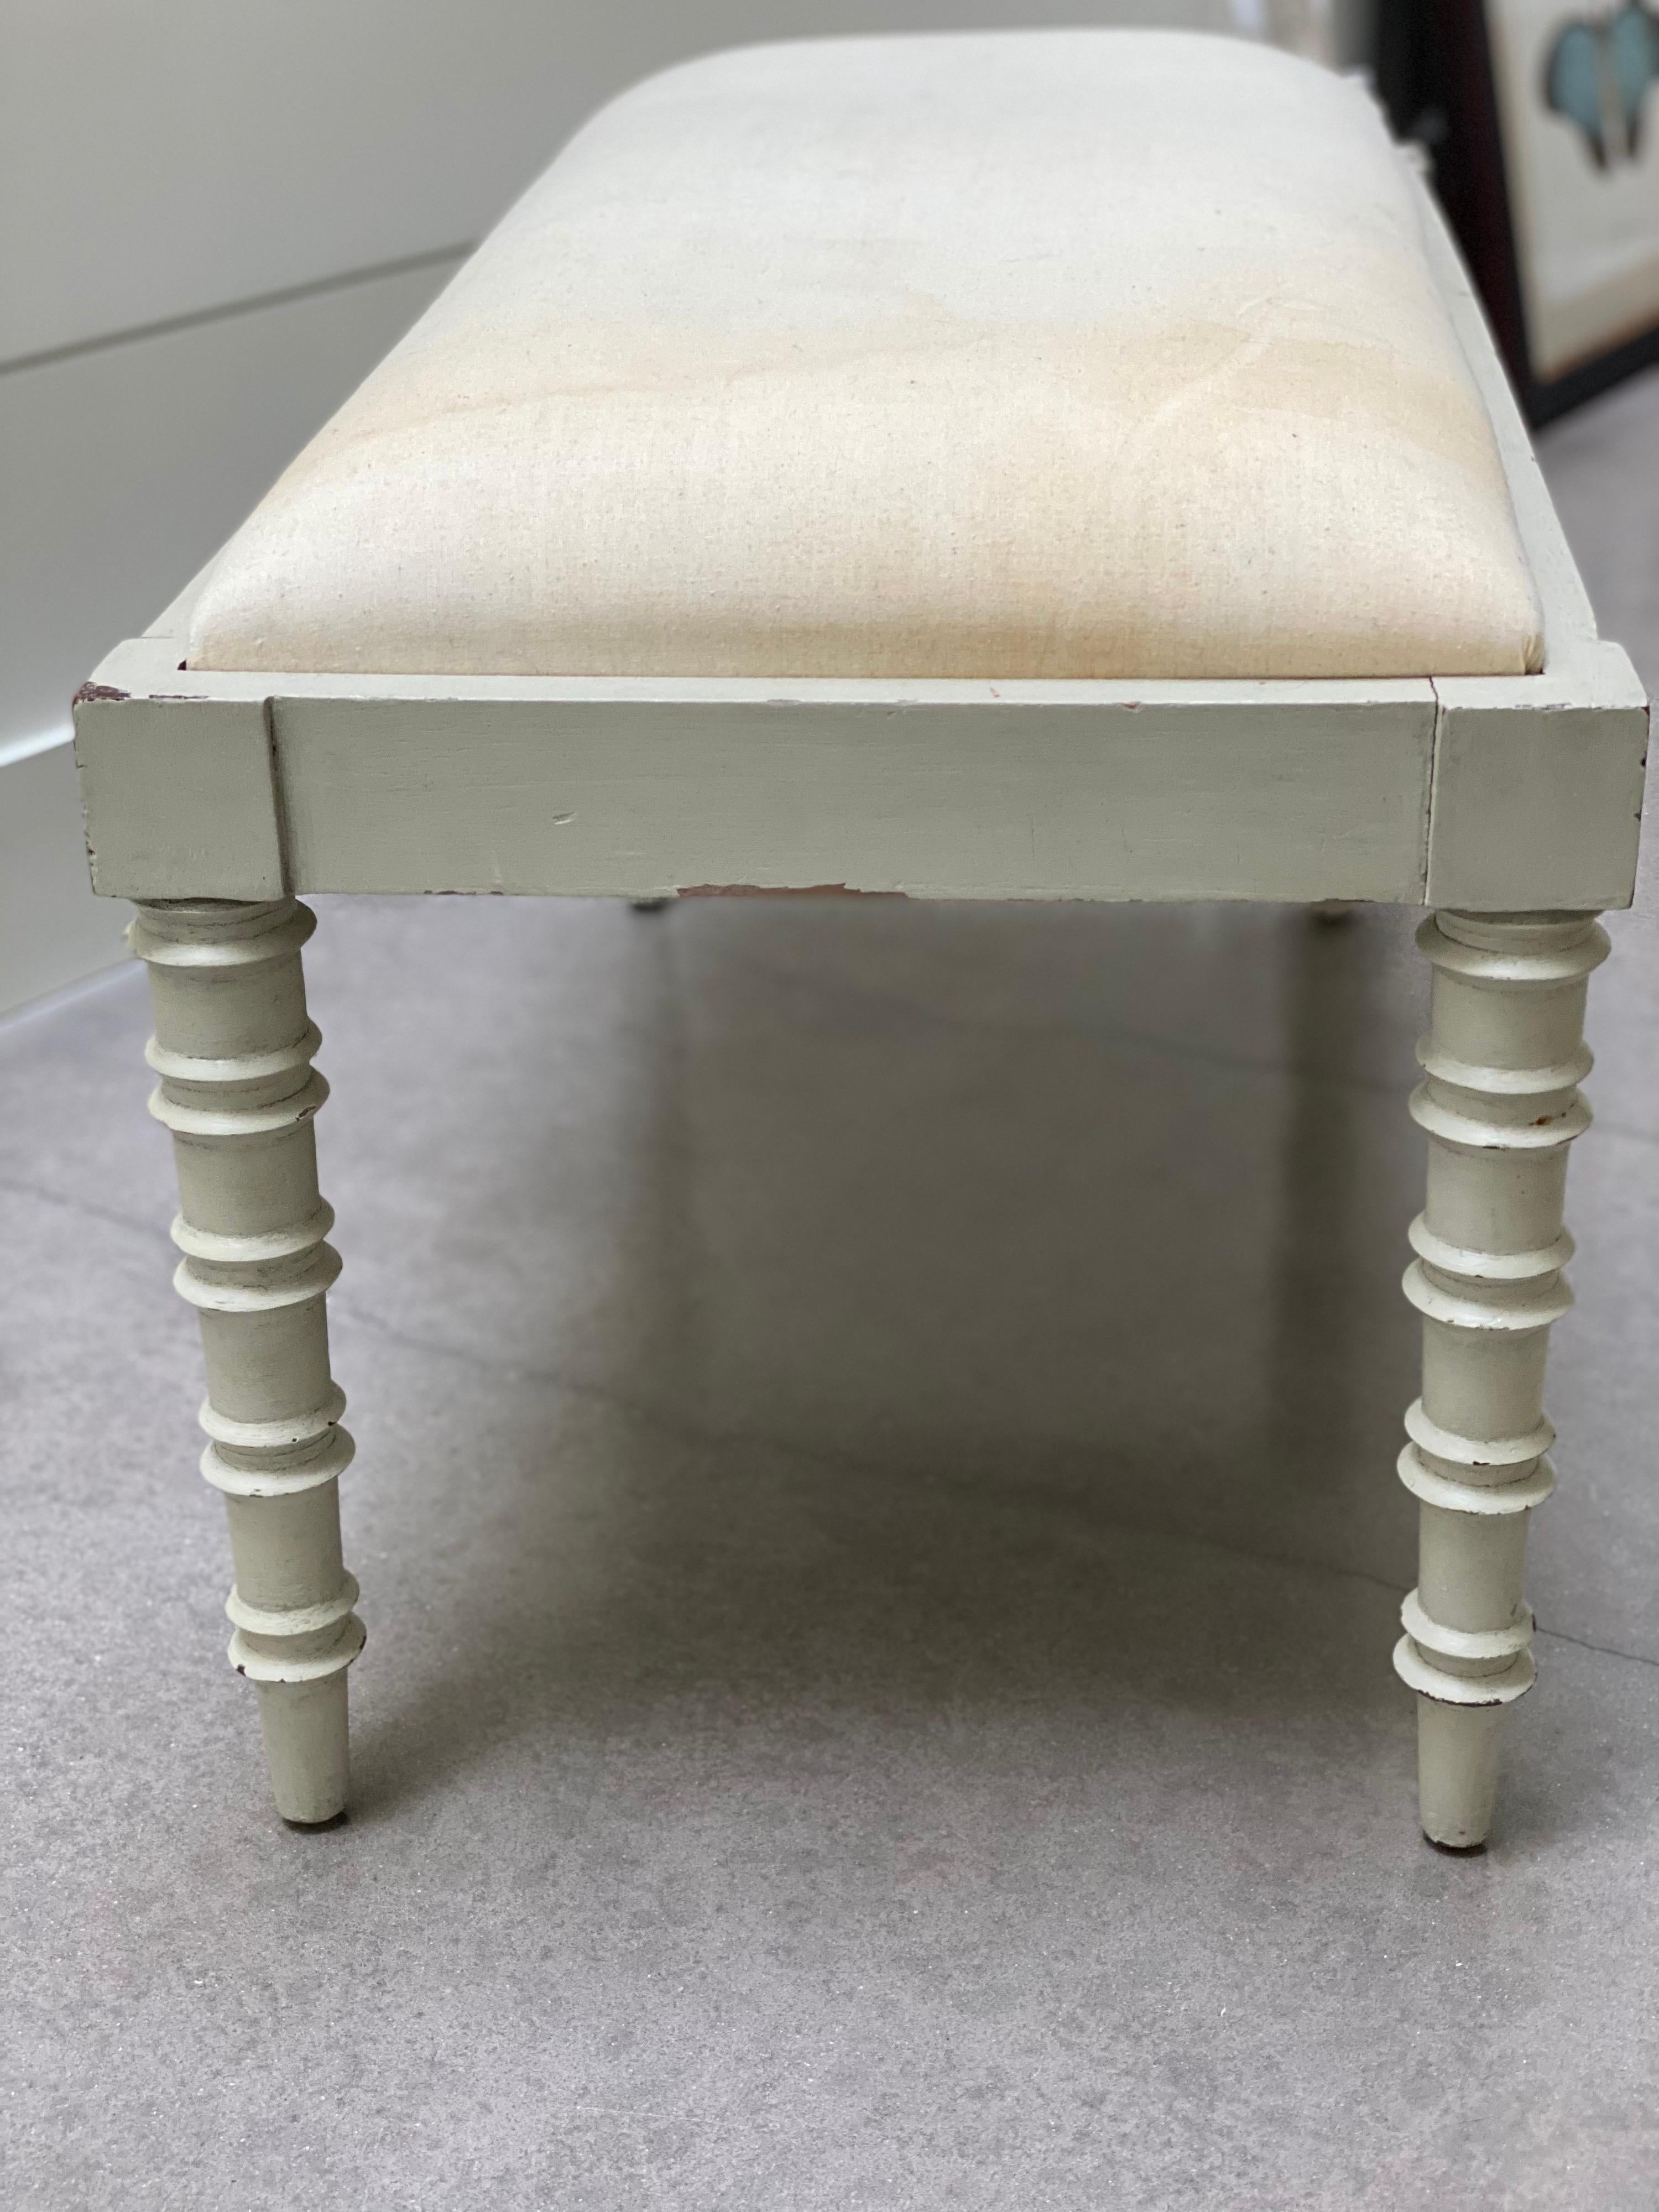 Painted White Bamboo Style Bench in Robert Kime Oak Leaf Fabric